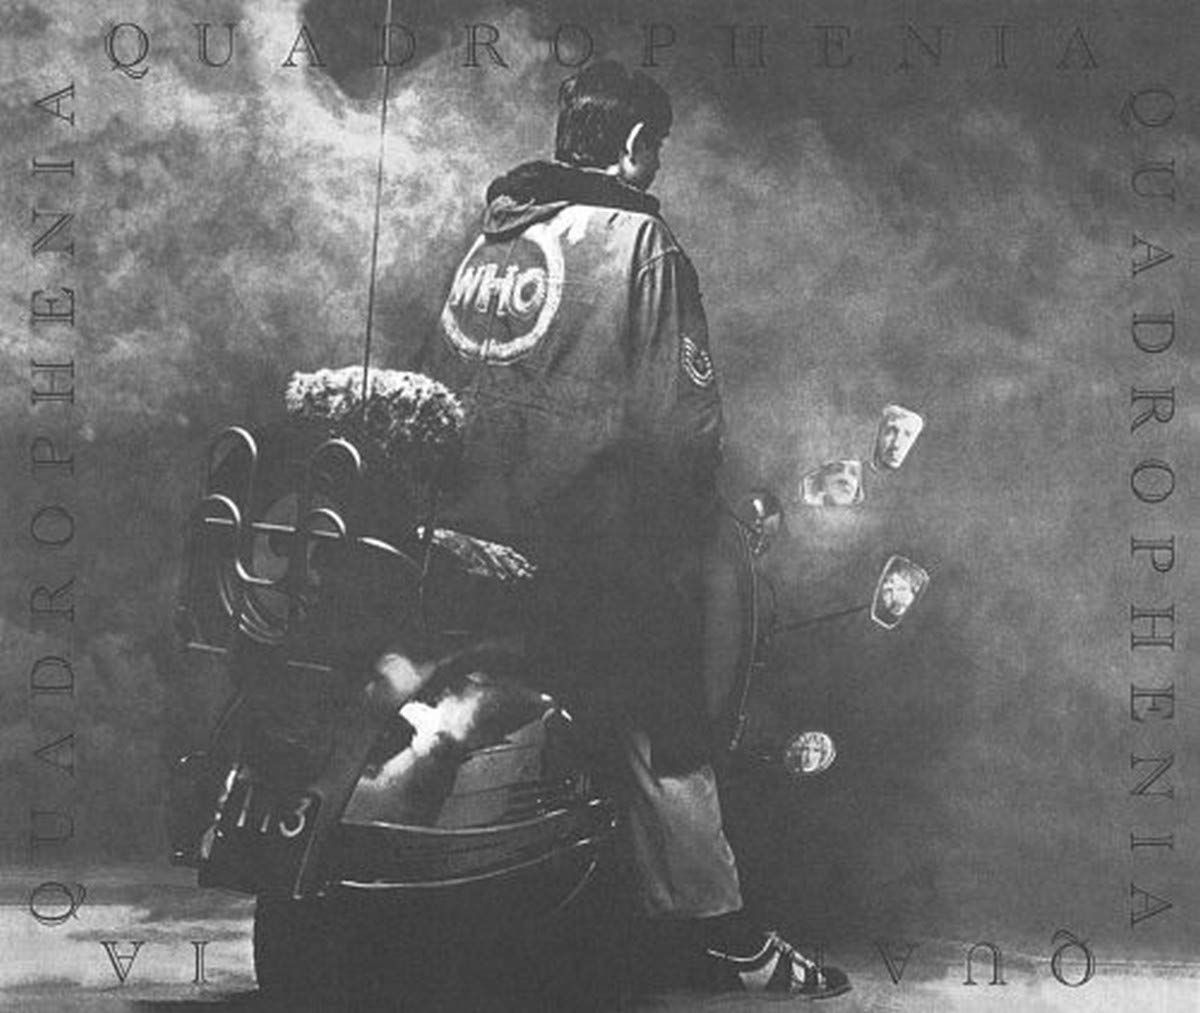 #Dubbelaars - The Who - The Real Me - 'Quadrophenia' (1973)